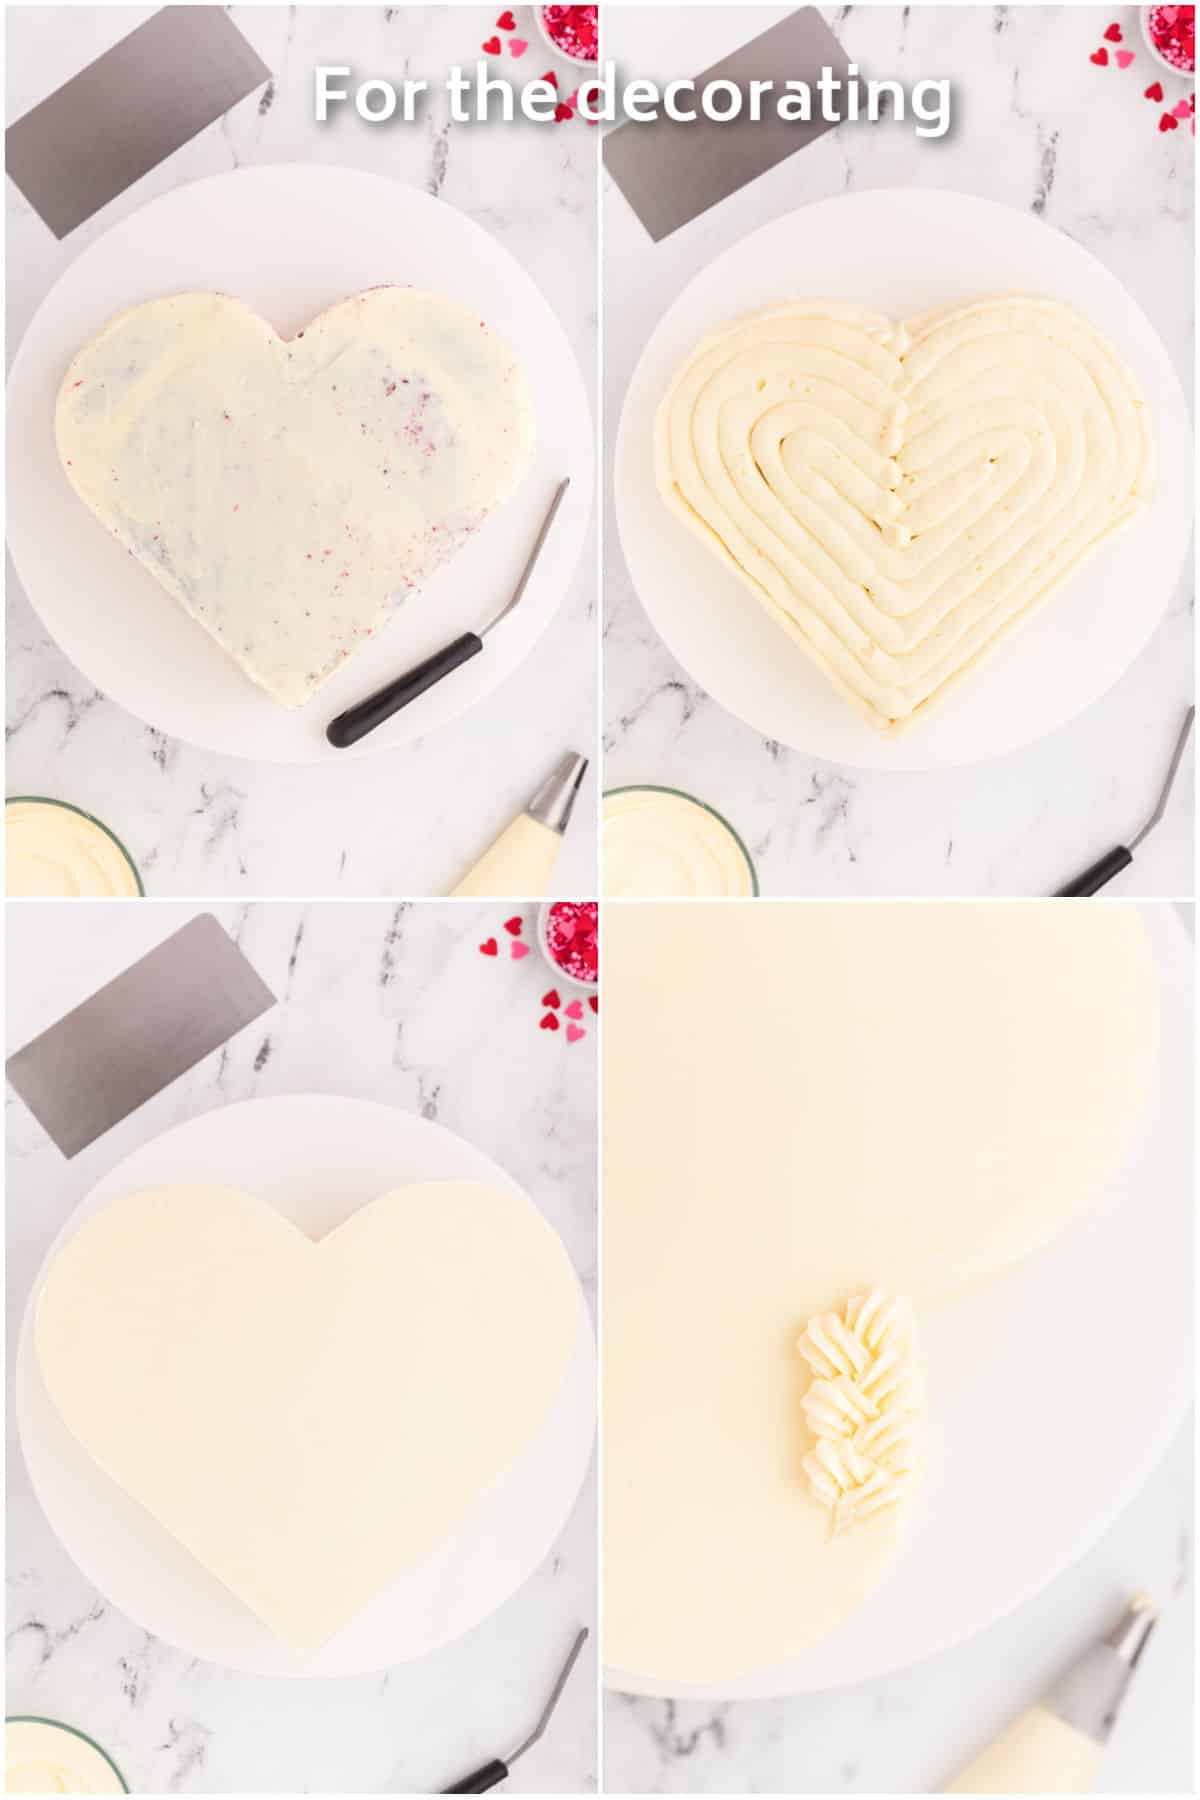 Frosting piped onto a heart shaped cake.